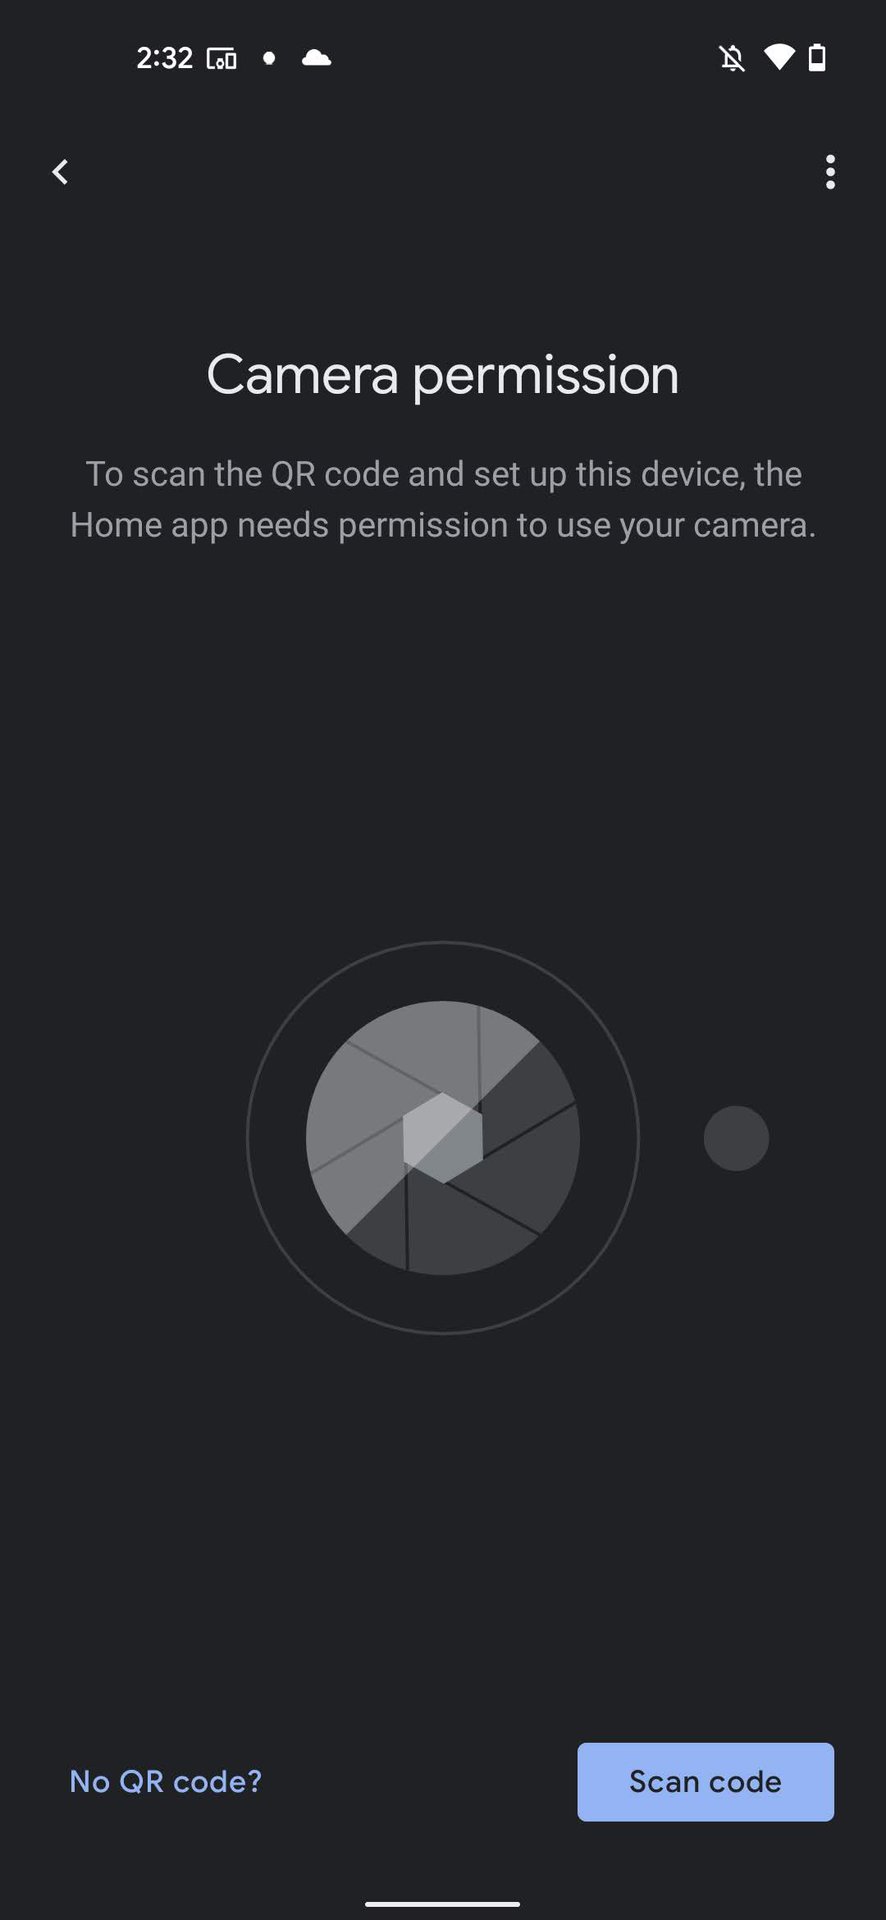 golf En begivenhed tjeneren How to set up Chromecast with your smartphone Android Authority